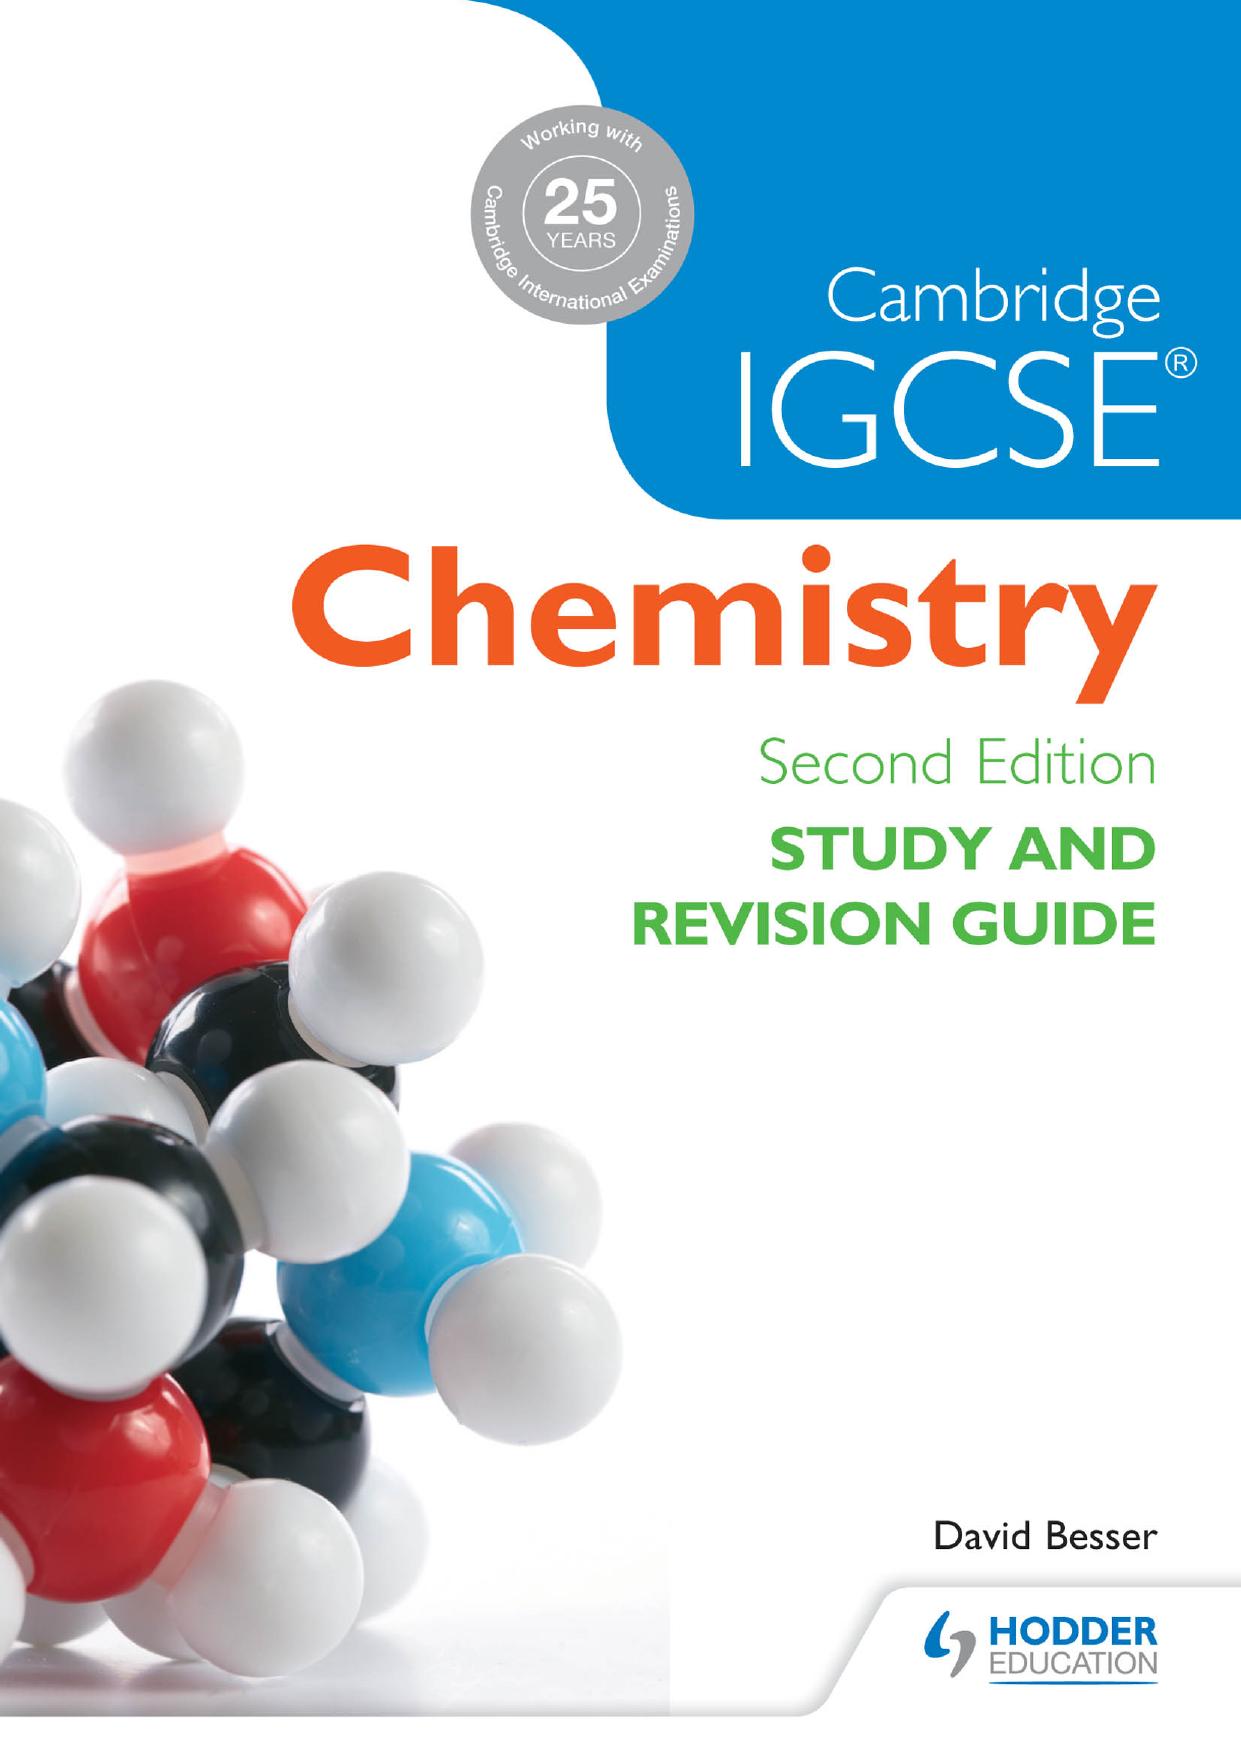 cambridge-igcse-chemistry-study-and-revision-guide-2nd-edition-softarchive